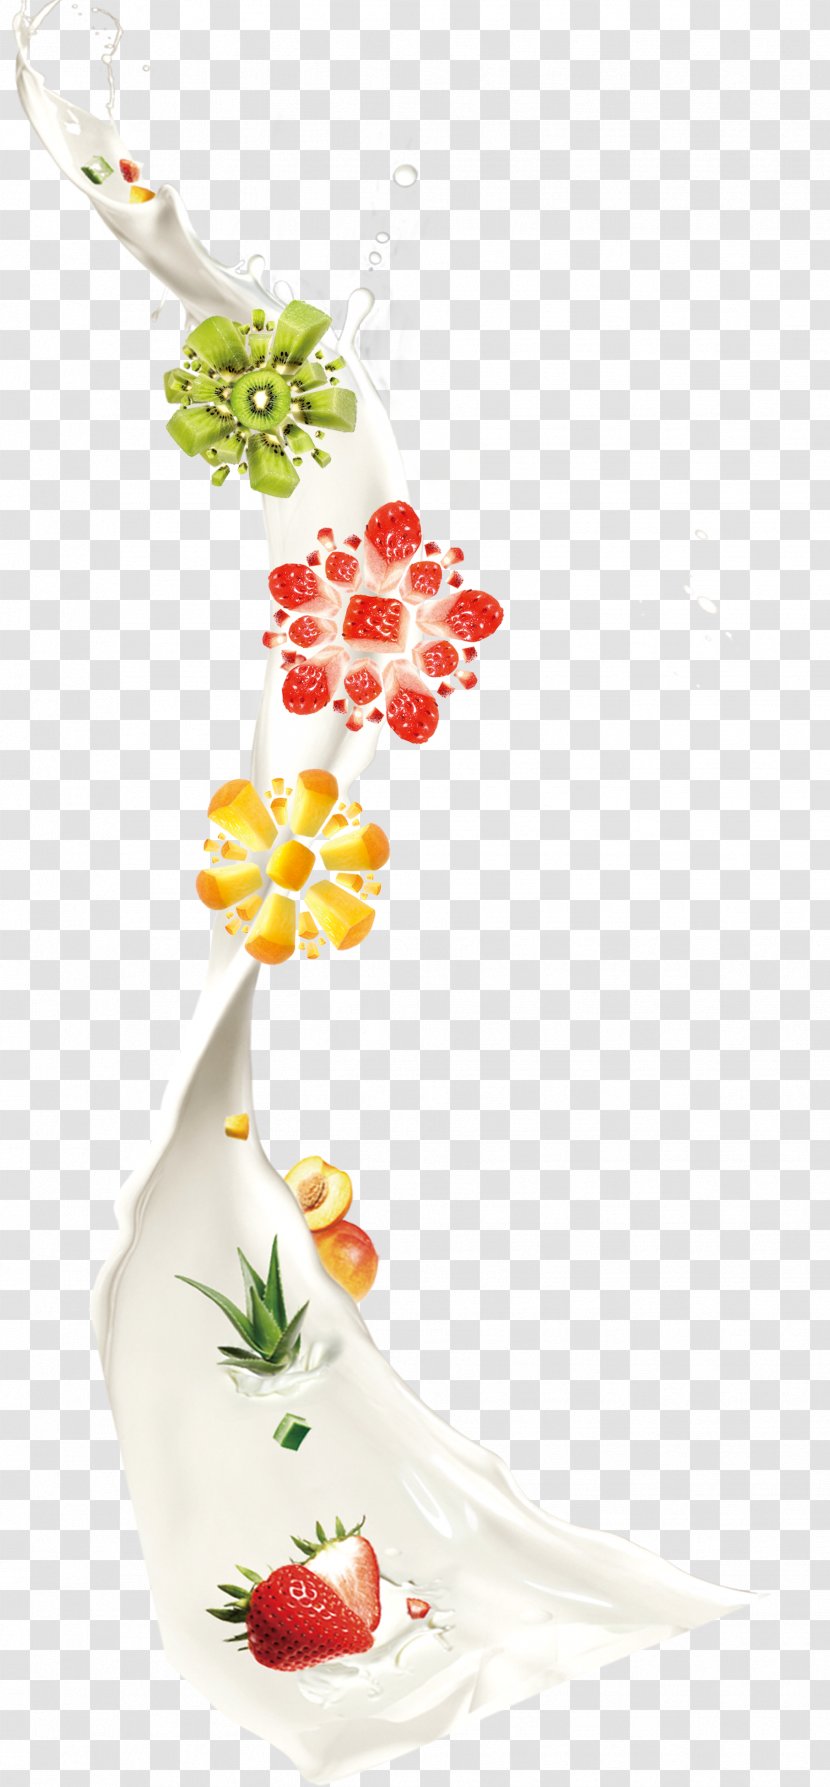 Strawberry Cows Milk Fruit - Splash Of And Transparent PNG